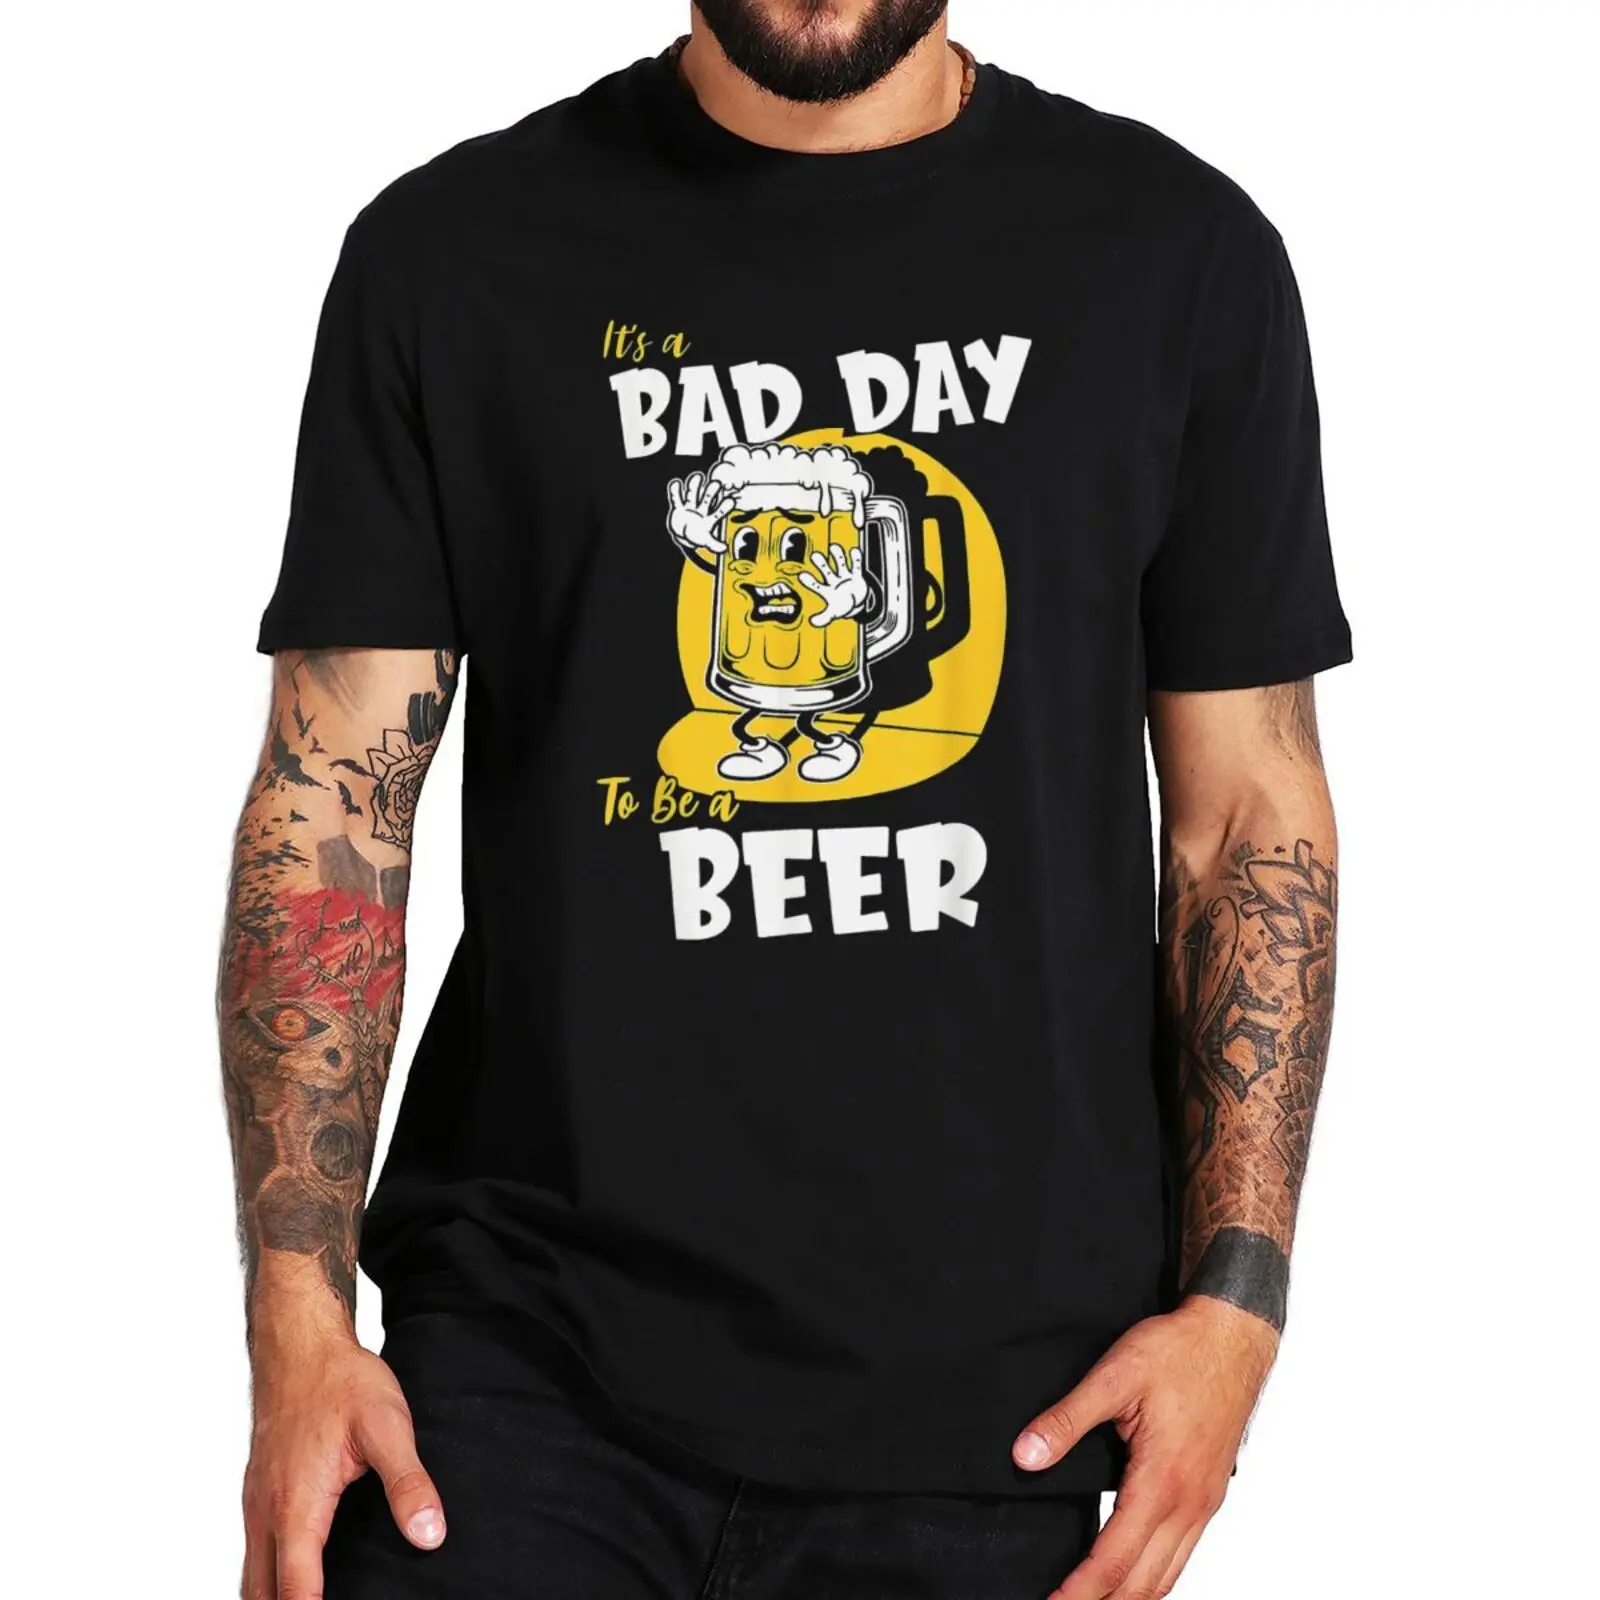 

It's A Bad Day To Be A Beer T-Shirt Funny Drinking Jokes Graphic Men Clothing Summer 100% Cotton Soft Casual T Shirt EU Size